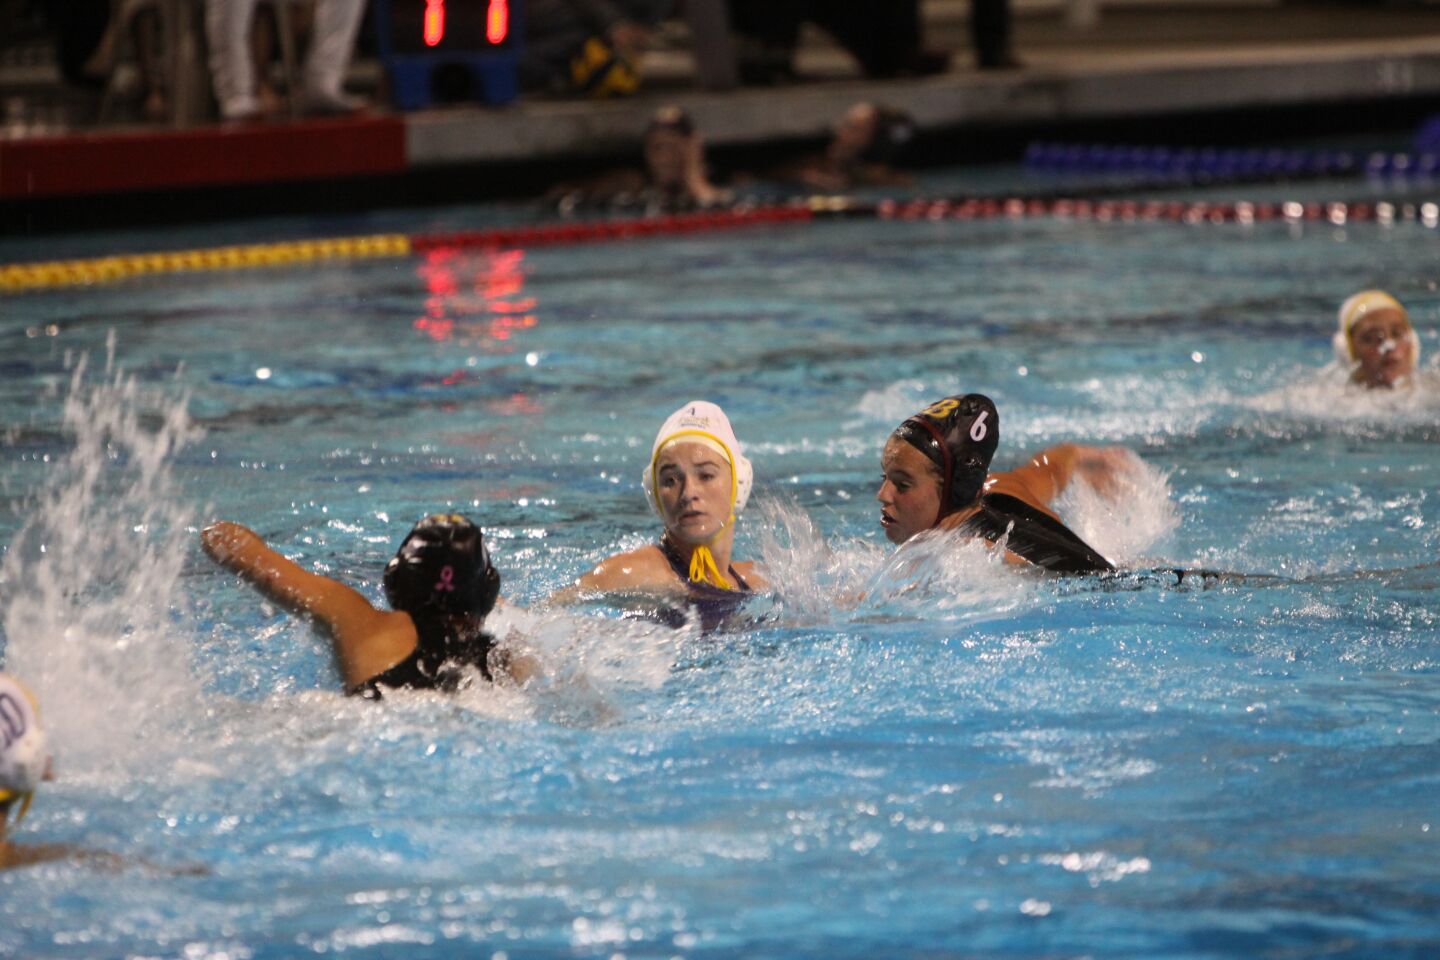 Maggie Johnson (6) contributed to the Knights' stifling defense with three steals against Grossmont.